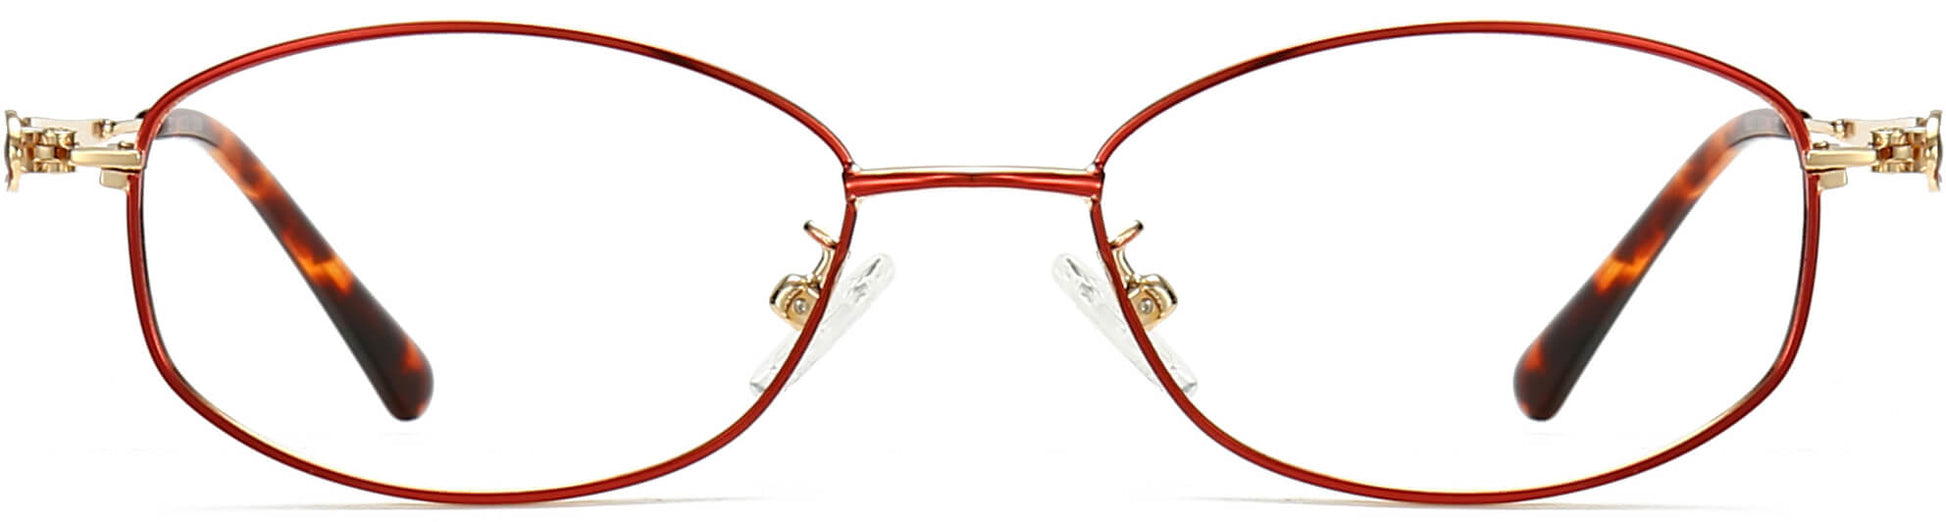 Karla Round Red Eyeglasses from ANRRI, front view